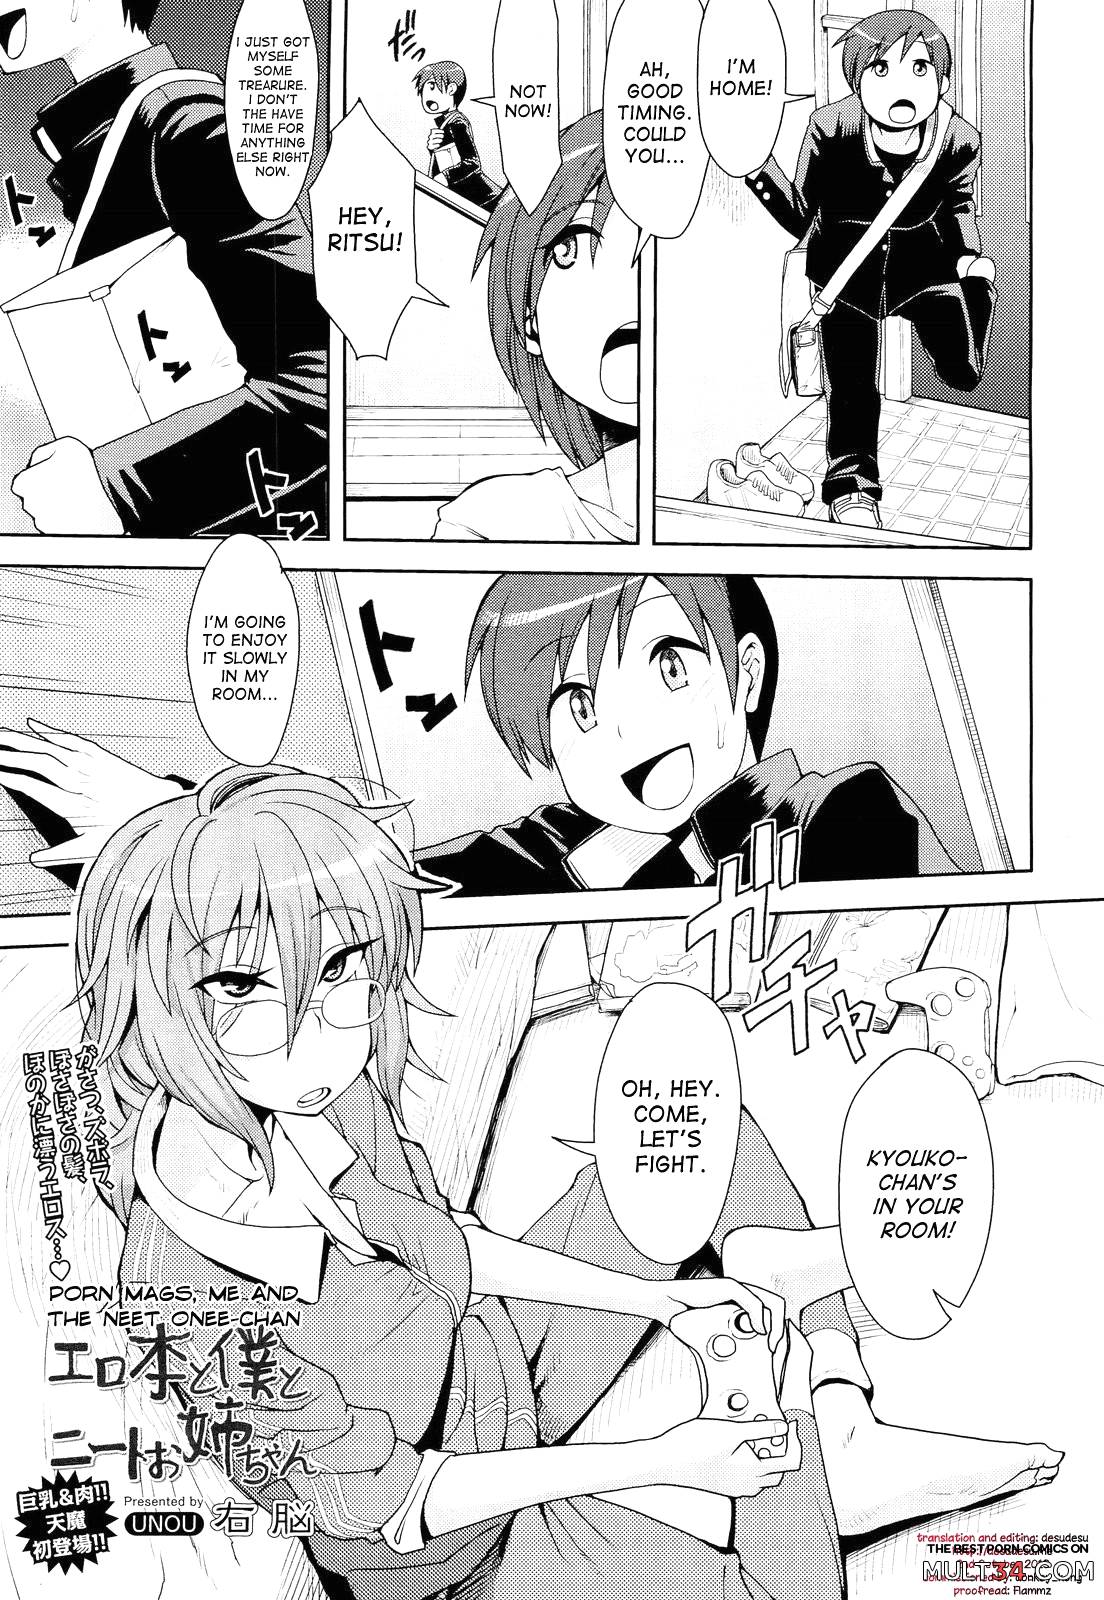 Porn Mags, Me and The NEET Onee-chan page 1